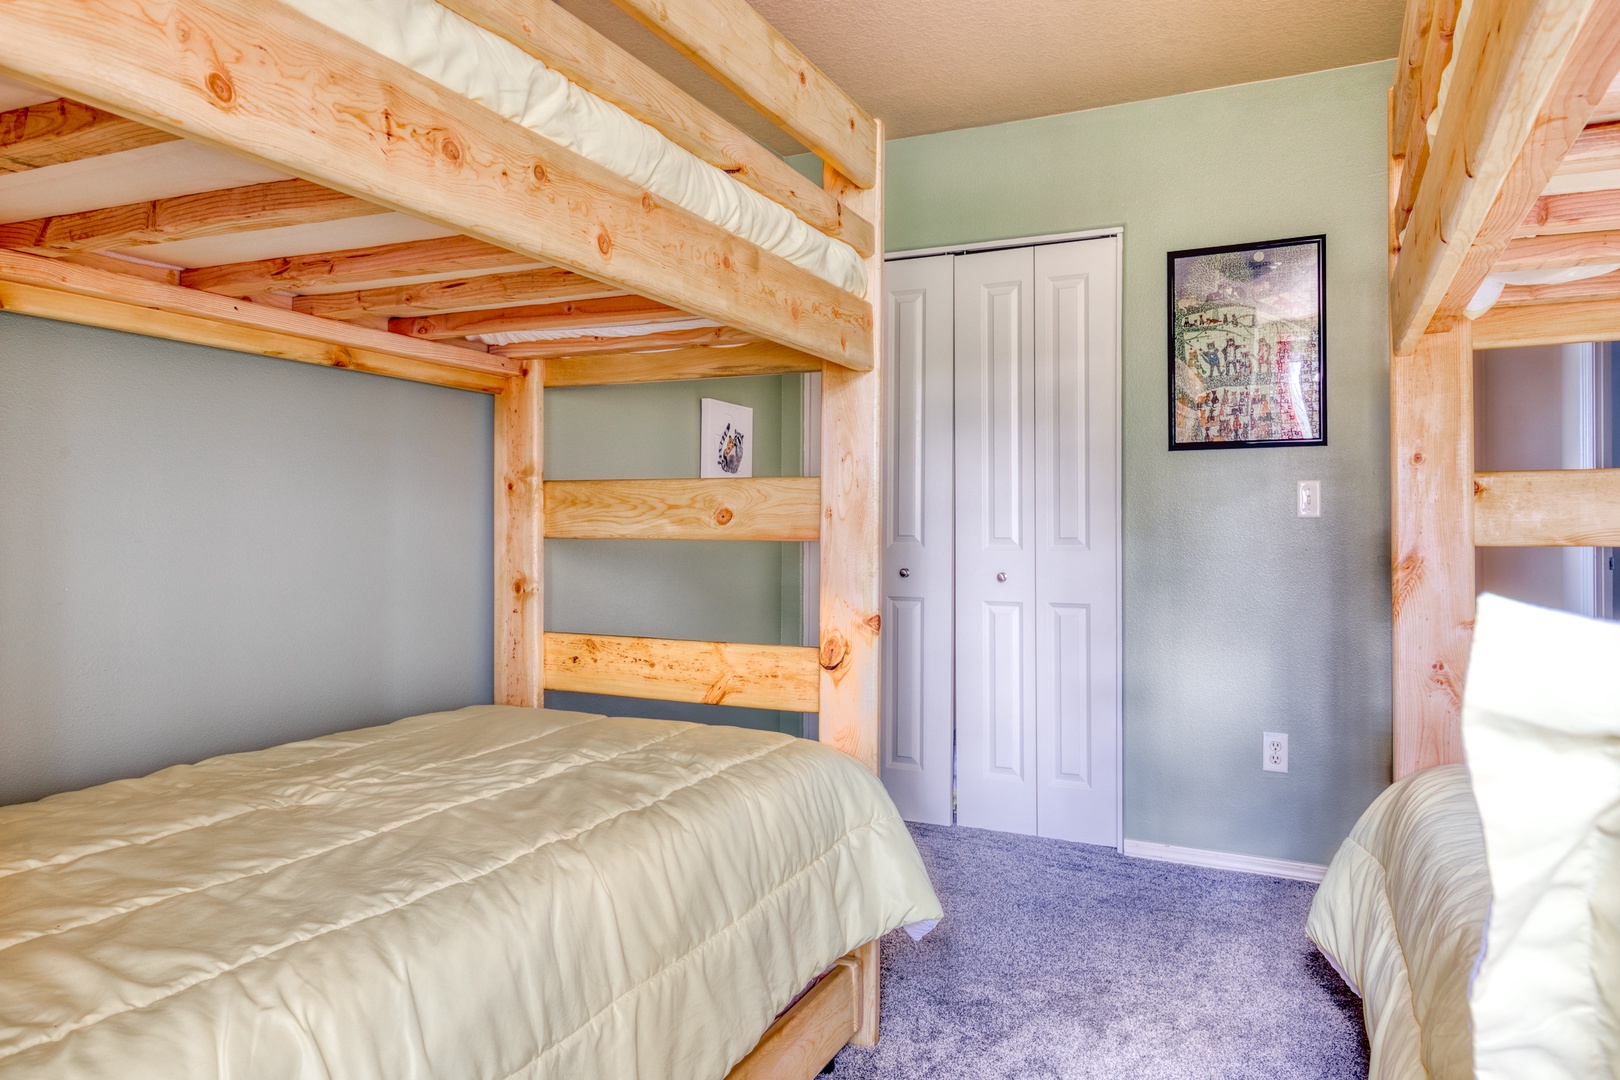 Clackamas Vacation Rentals, Duck Crossing - There's a spacious closet to store your belongings